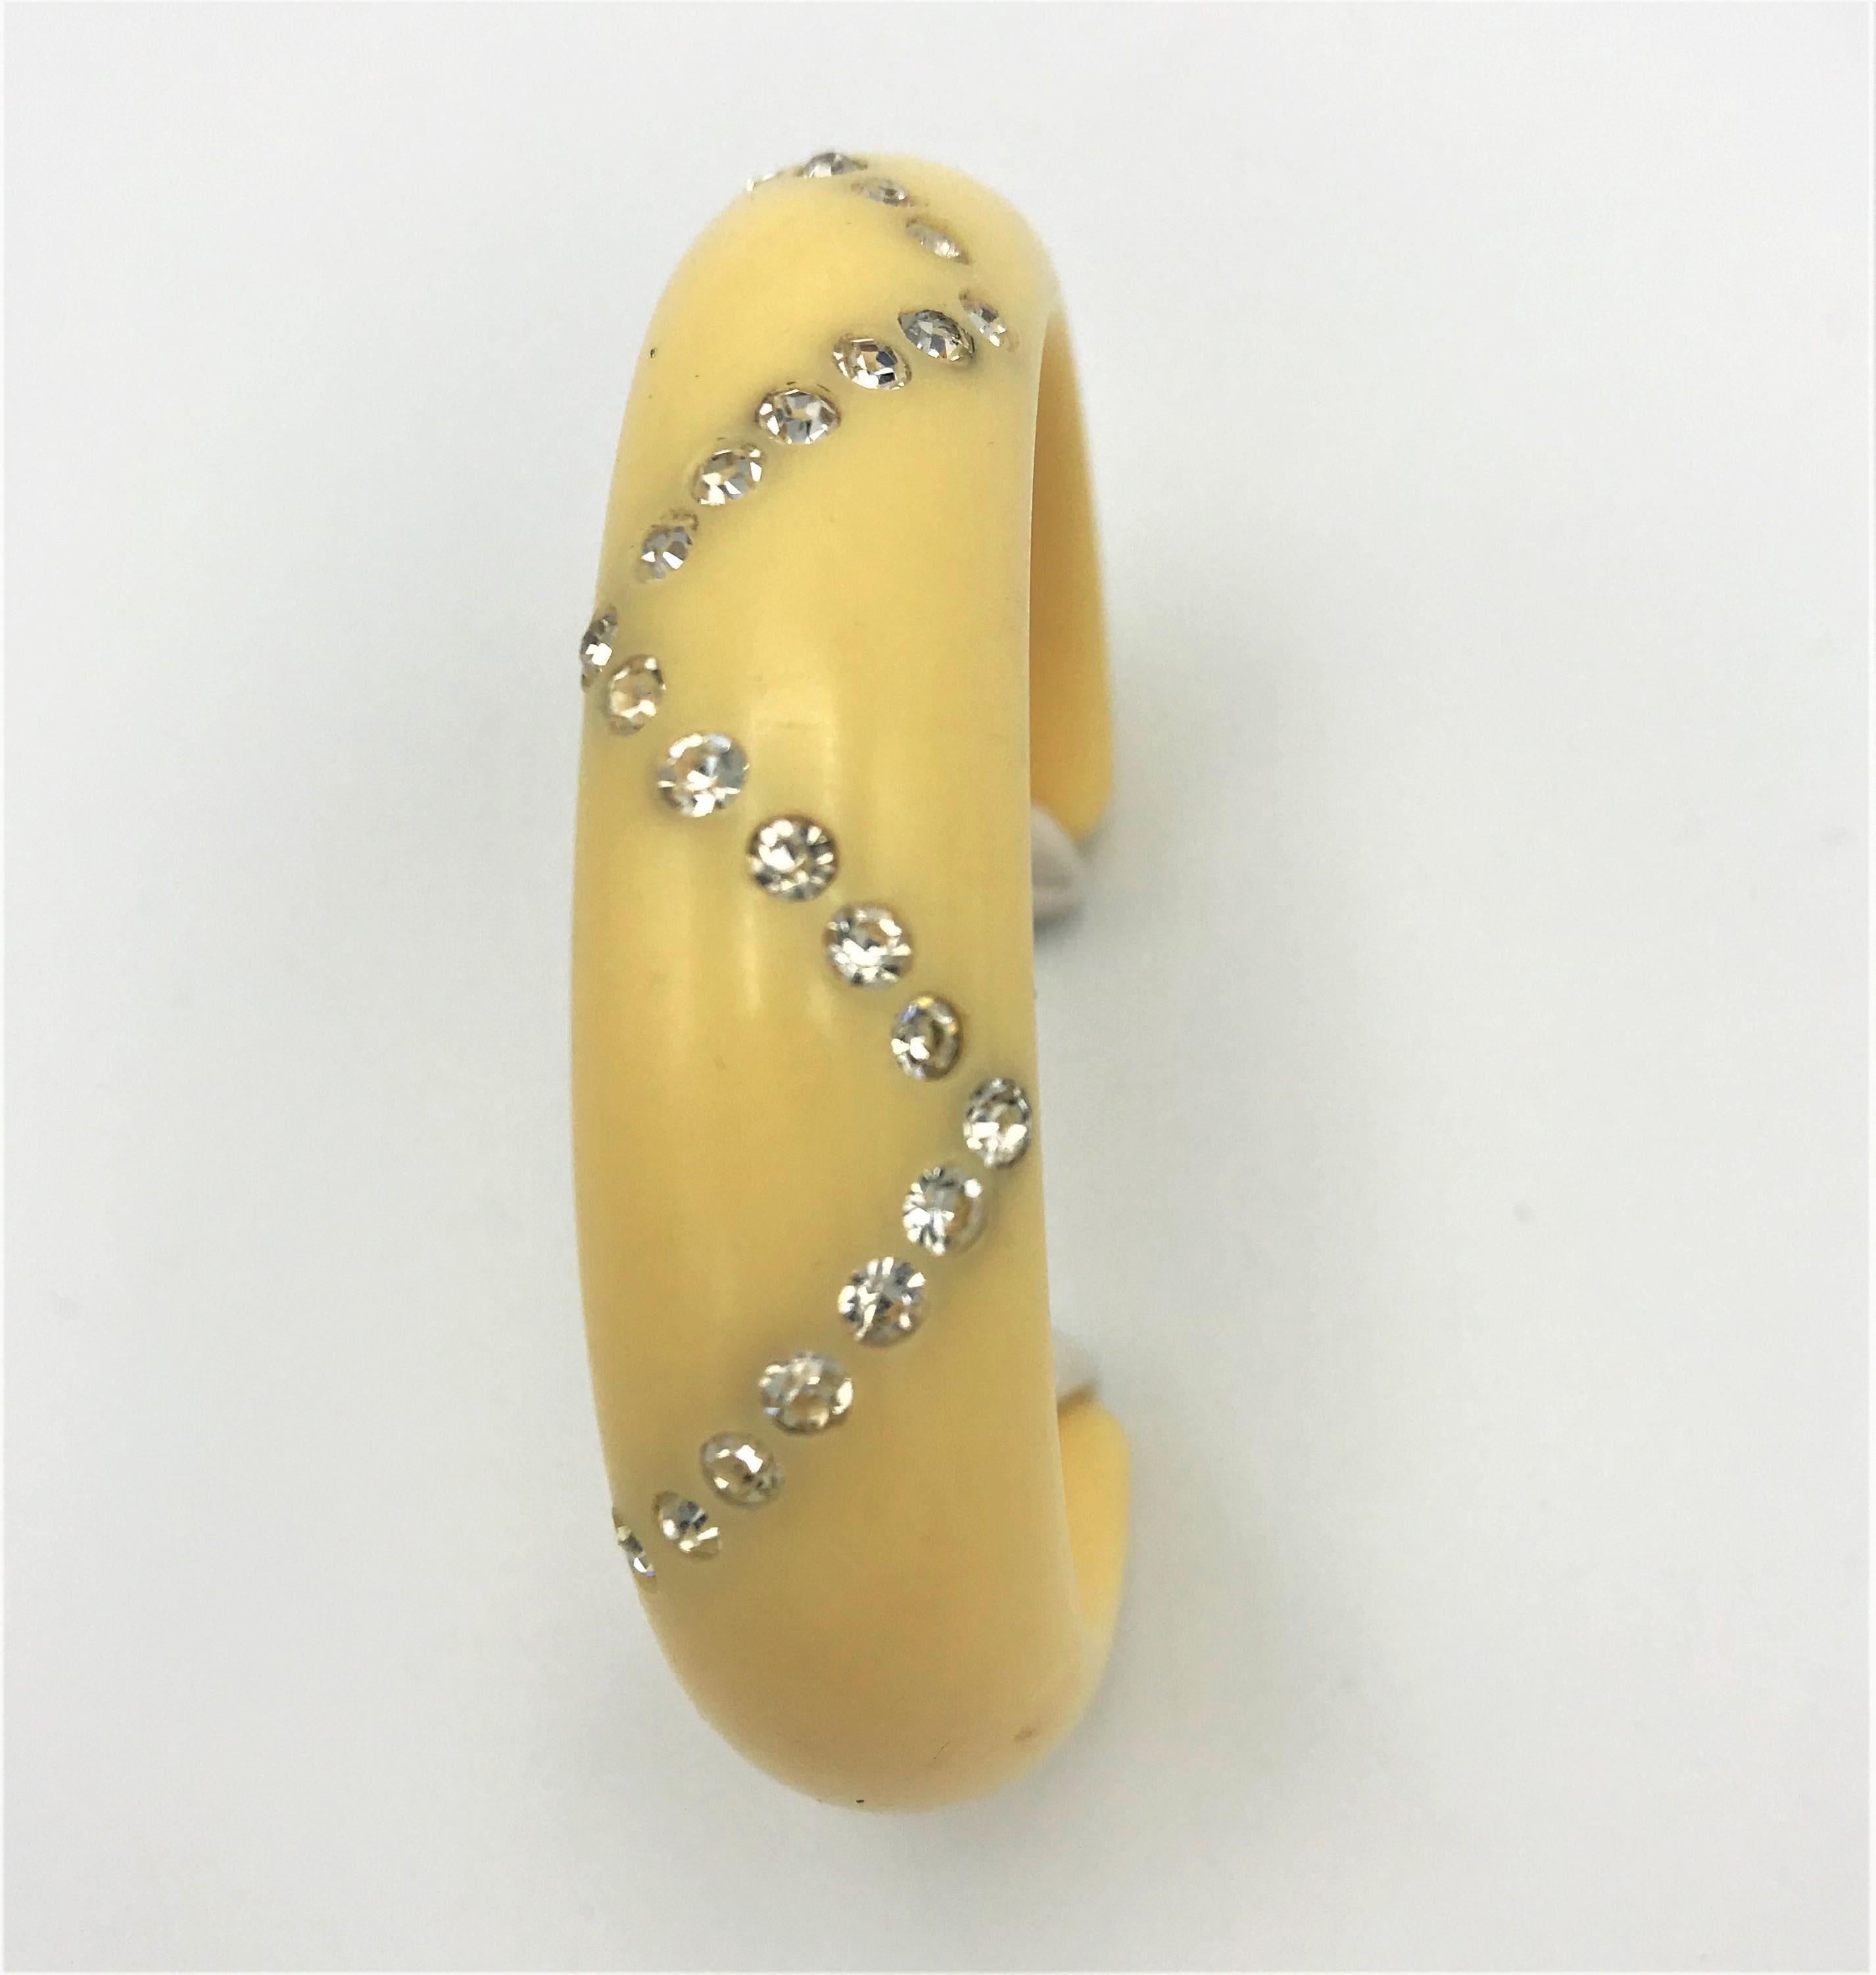 Nice Bakelite ivory-colored open bangle set with clear rhinestones .
Measurement: Width inside 2 cm, outside 2,5 cm. Inside width from opening to opening 13 cm +
3 cm . Diameter of the oval 6 cm. 
Good condition and a very nice bangle. 